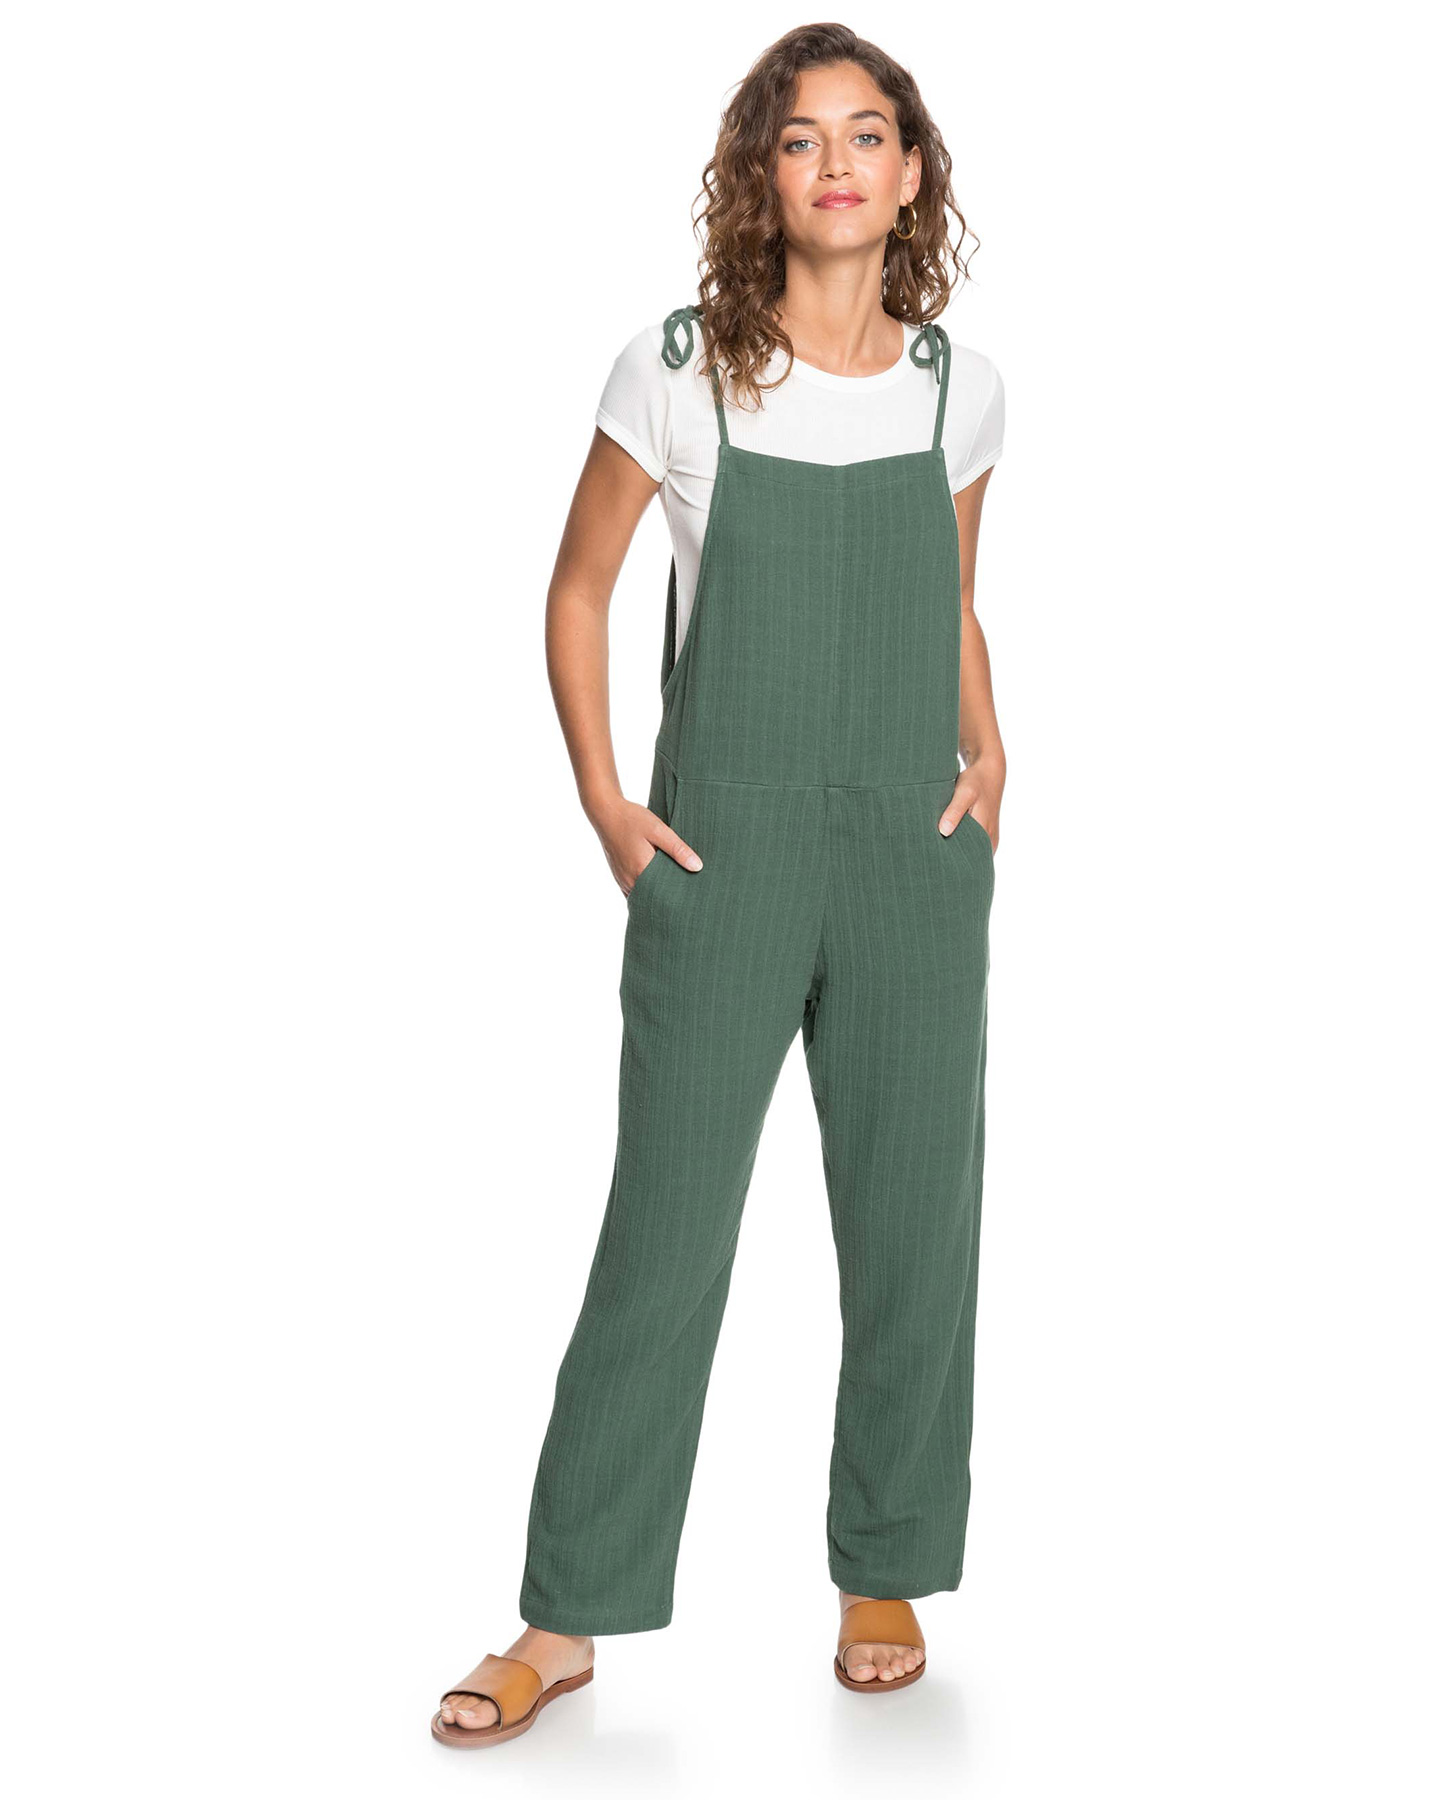 Roxy Womens One Day Without Strappy Jumpsuit - Cilantro | SurfStitch